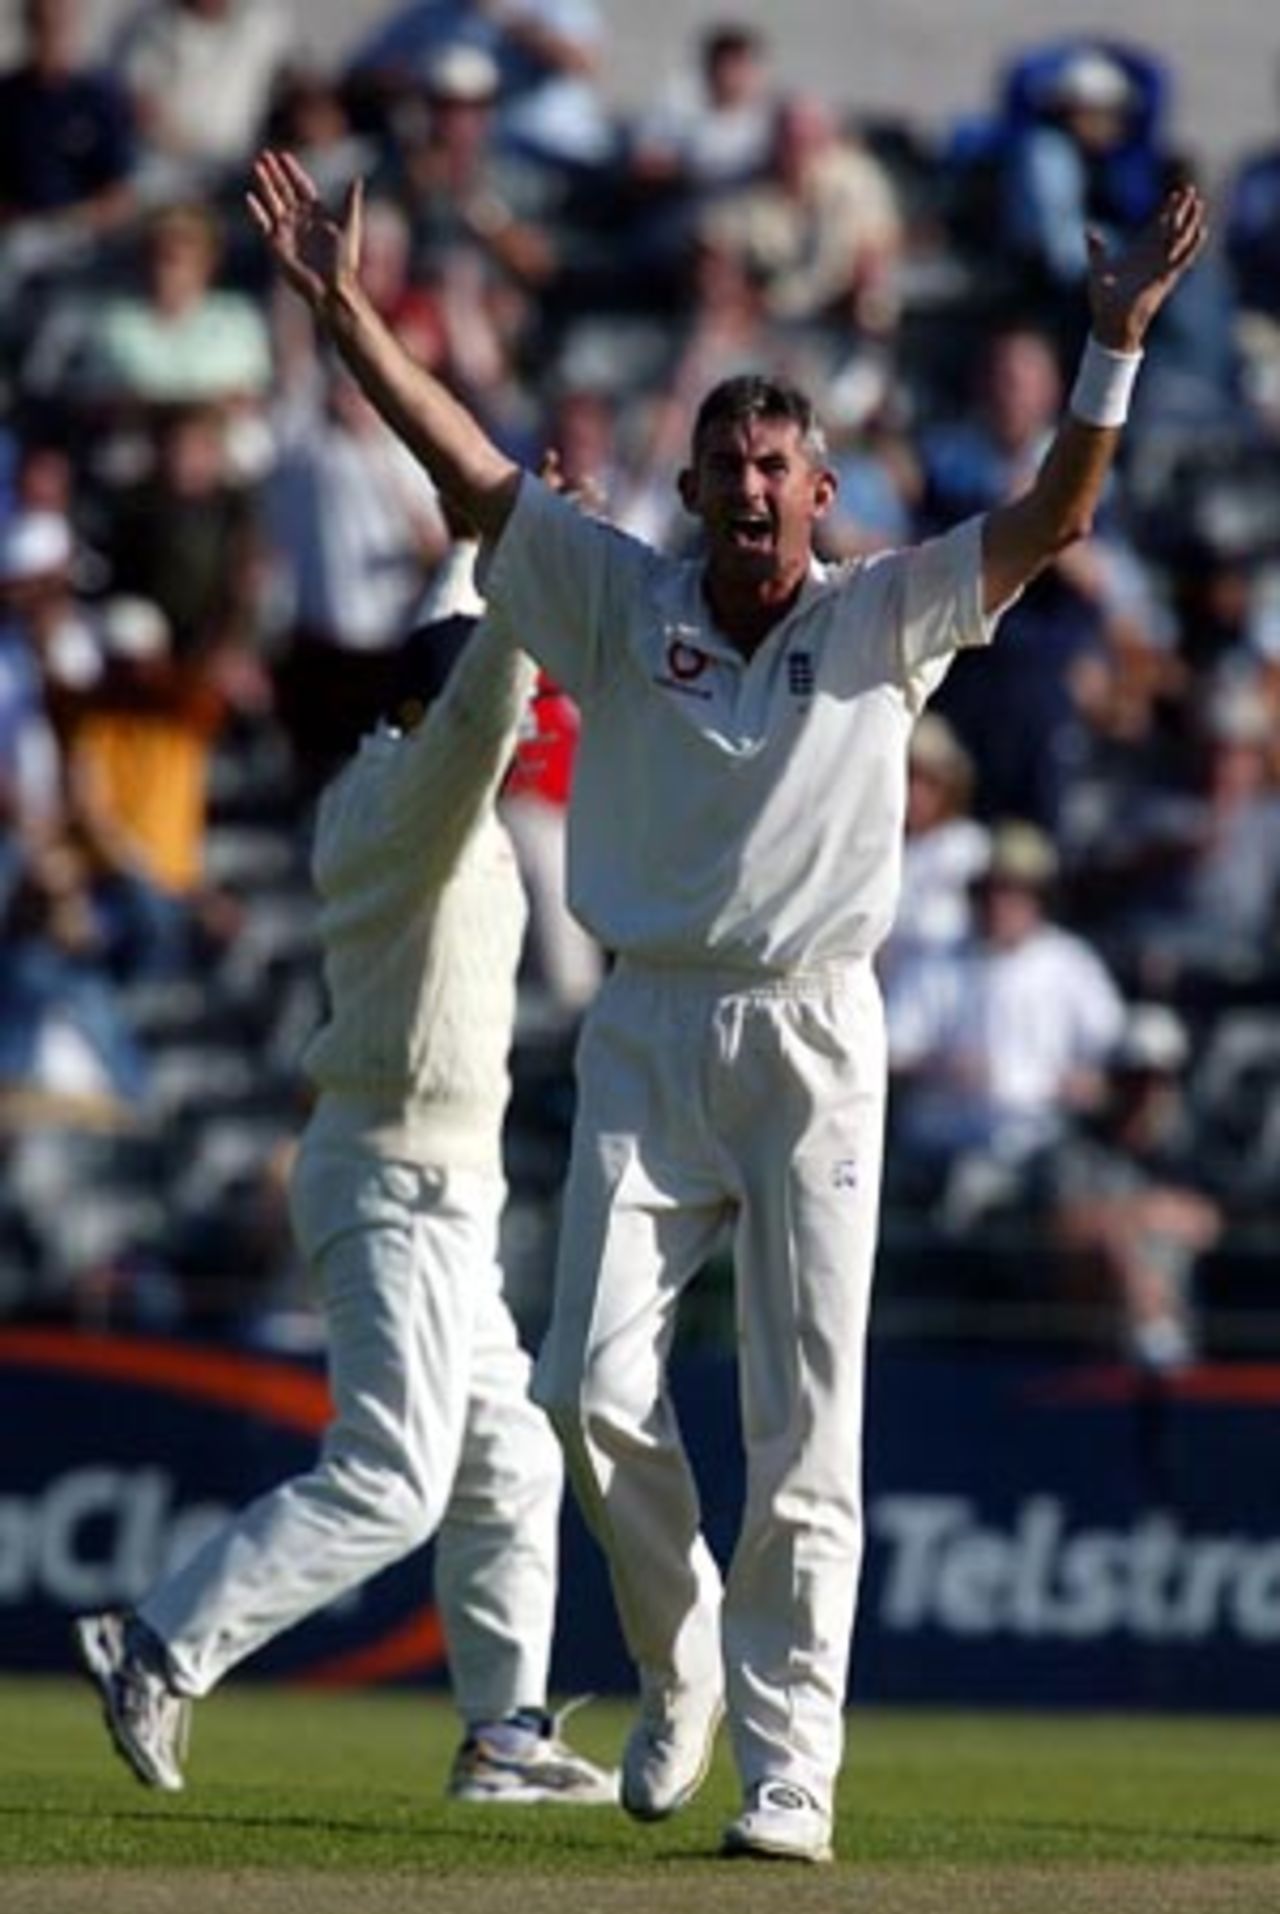 England bowler Andy Caddick unsuccessfully appeals for the dismissal of New Zealand batsman Mark Richardson, a catch at first slip by Nasser Hussain, during his third day spell of 0-20 from five overs. Fielder Mark Ramprakash joins in the appeal in the background. 1st Test: New Zealand v England at Jade Stadium, Christchurch, 13-17 March 2002 (15 March 2002).